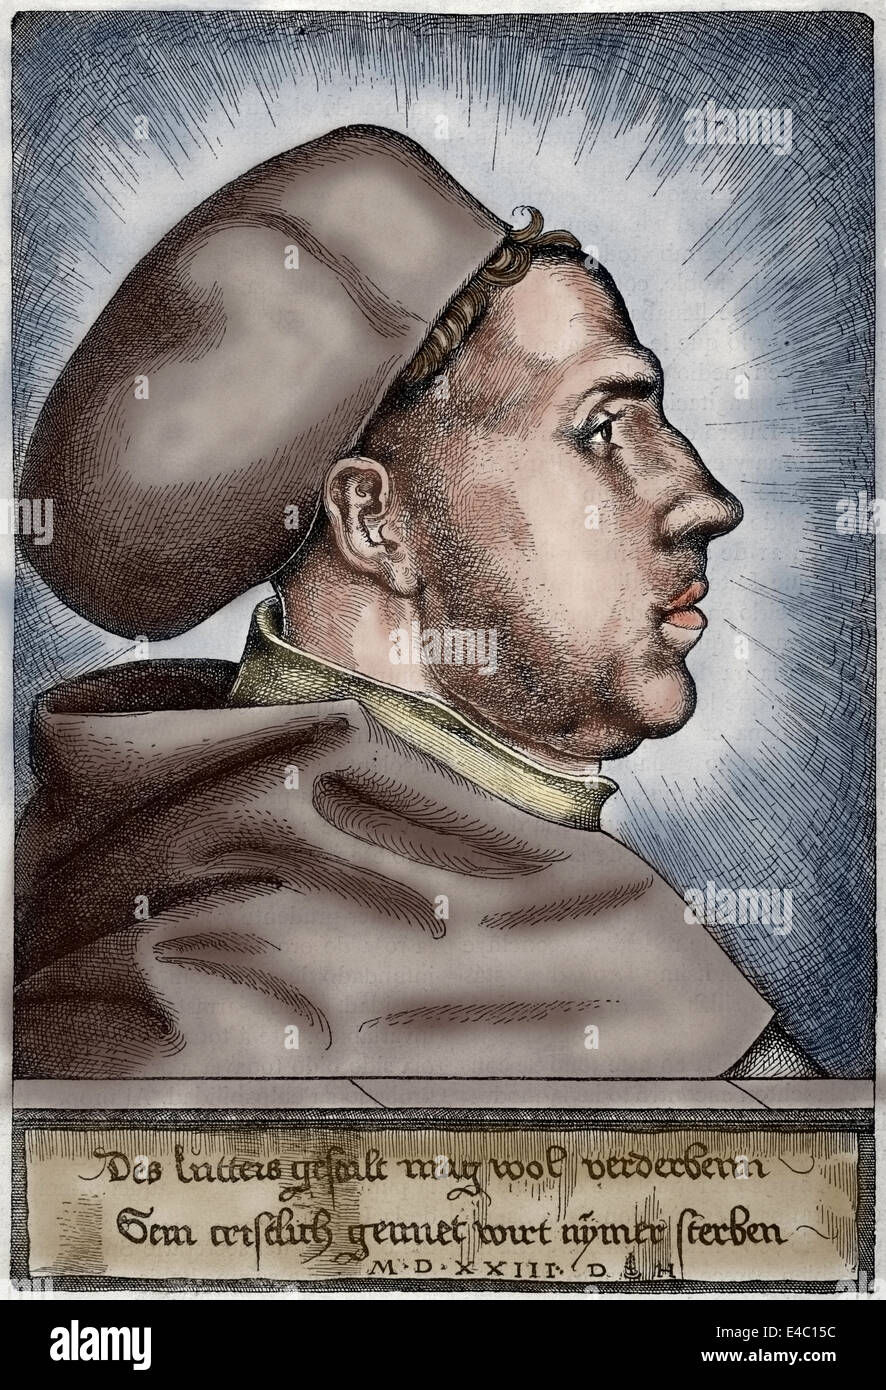 Martin Luther, (1483-1546). German reformer. Portrait. Engraving by Daniel Hopfer, 1523. Colored. Stock Photo